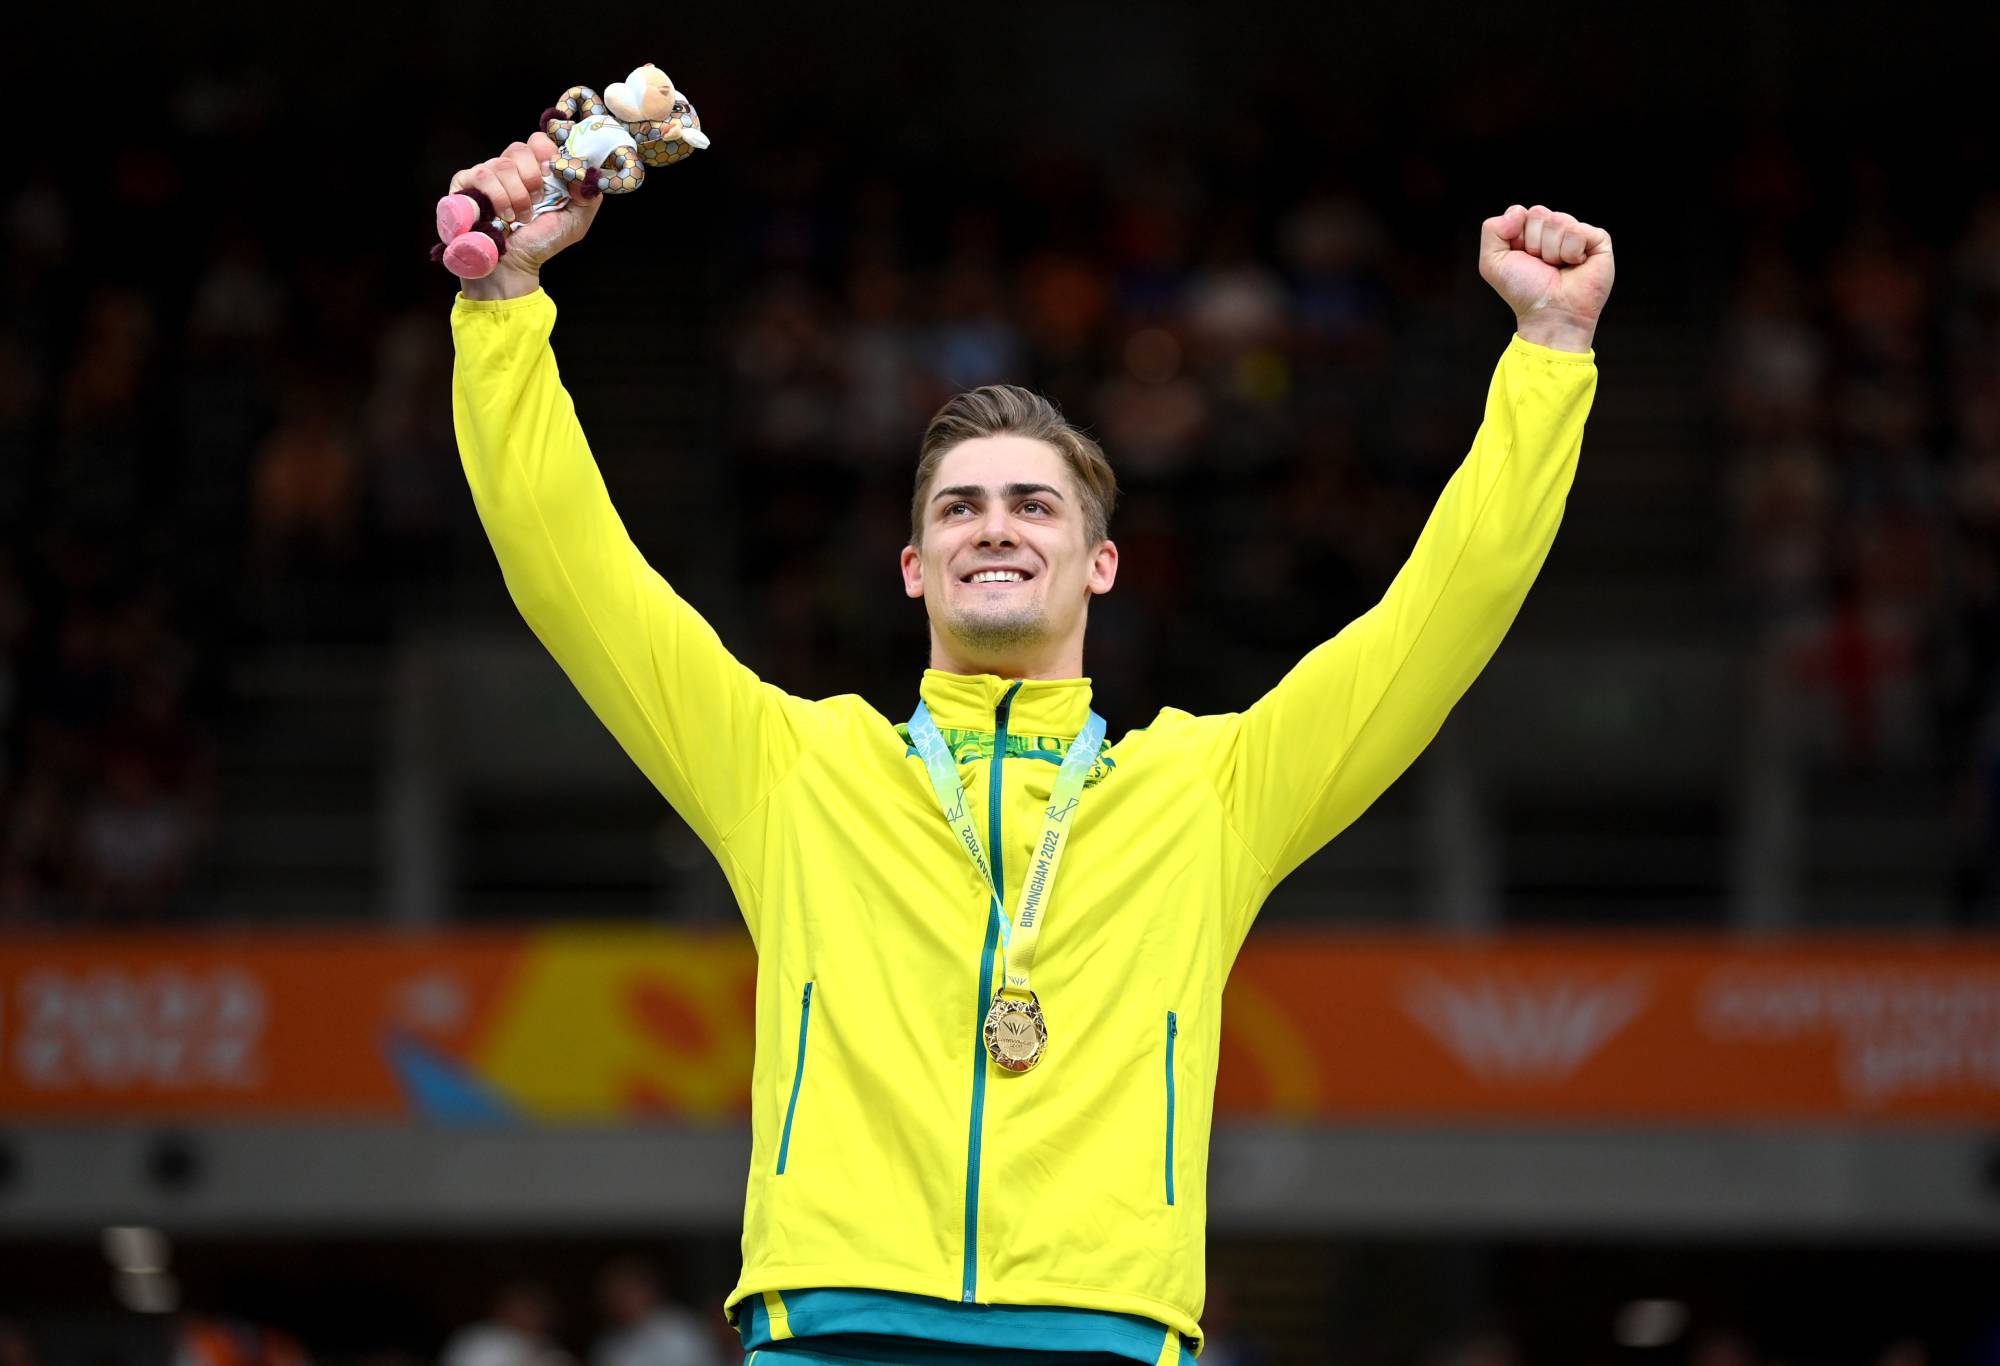 LONDON, ENGLAND - AUGUST 01: Gold Medalist, Matthew Glaetzer of Team Australia celebrates during the Men's 1000m Time Trial medal ceremony on day four of the Birmingham 2022 Commonwealth Games at Lee Valley Velopark Velodrome on August 01, 2022 on the London, England. (Photo by Justin Setterfield/Getty Images)